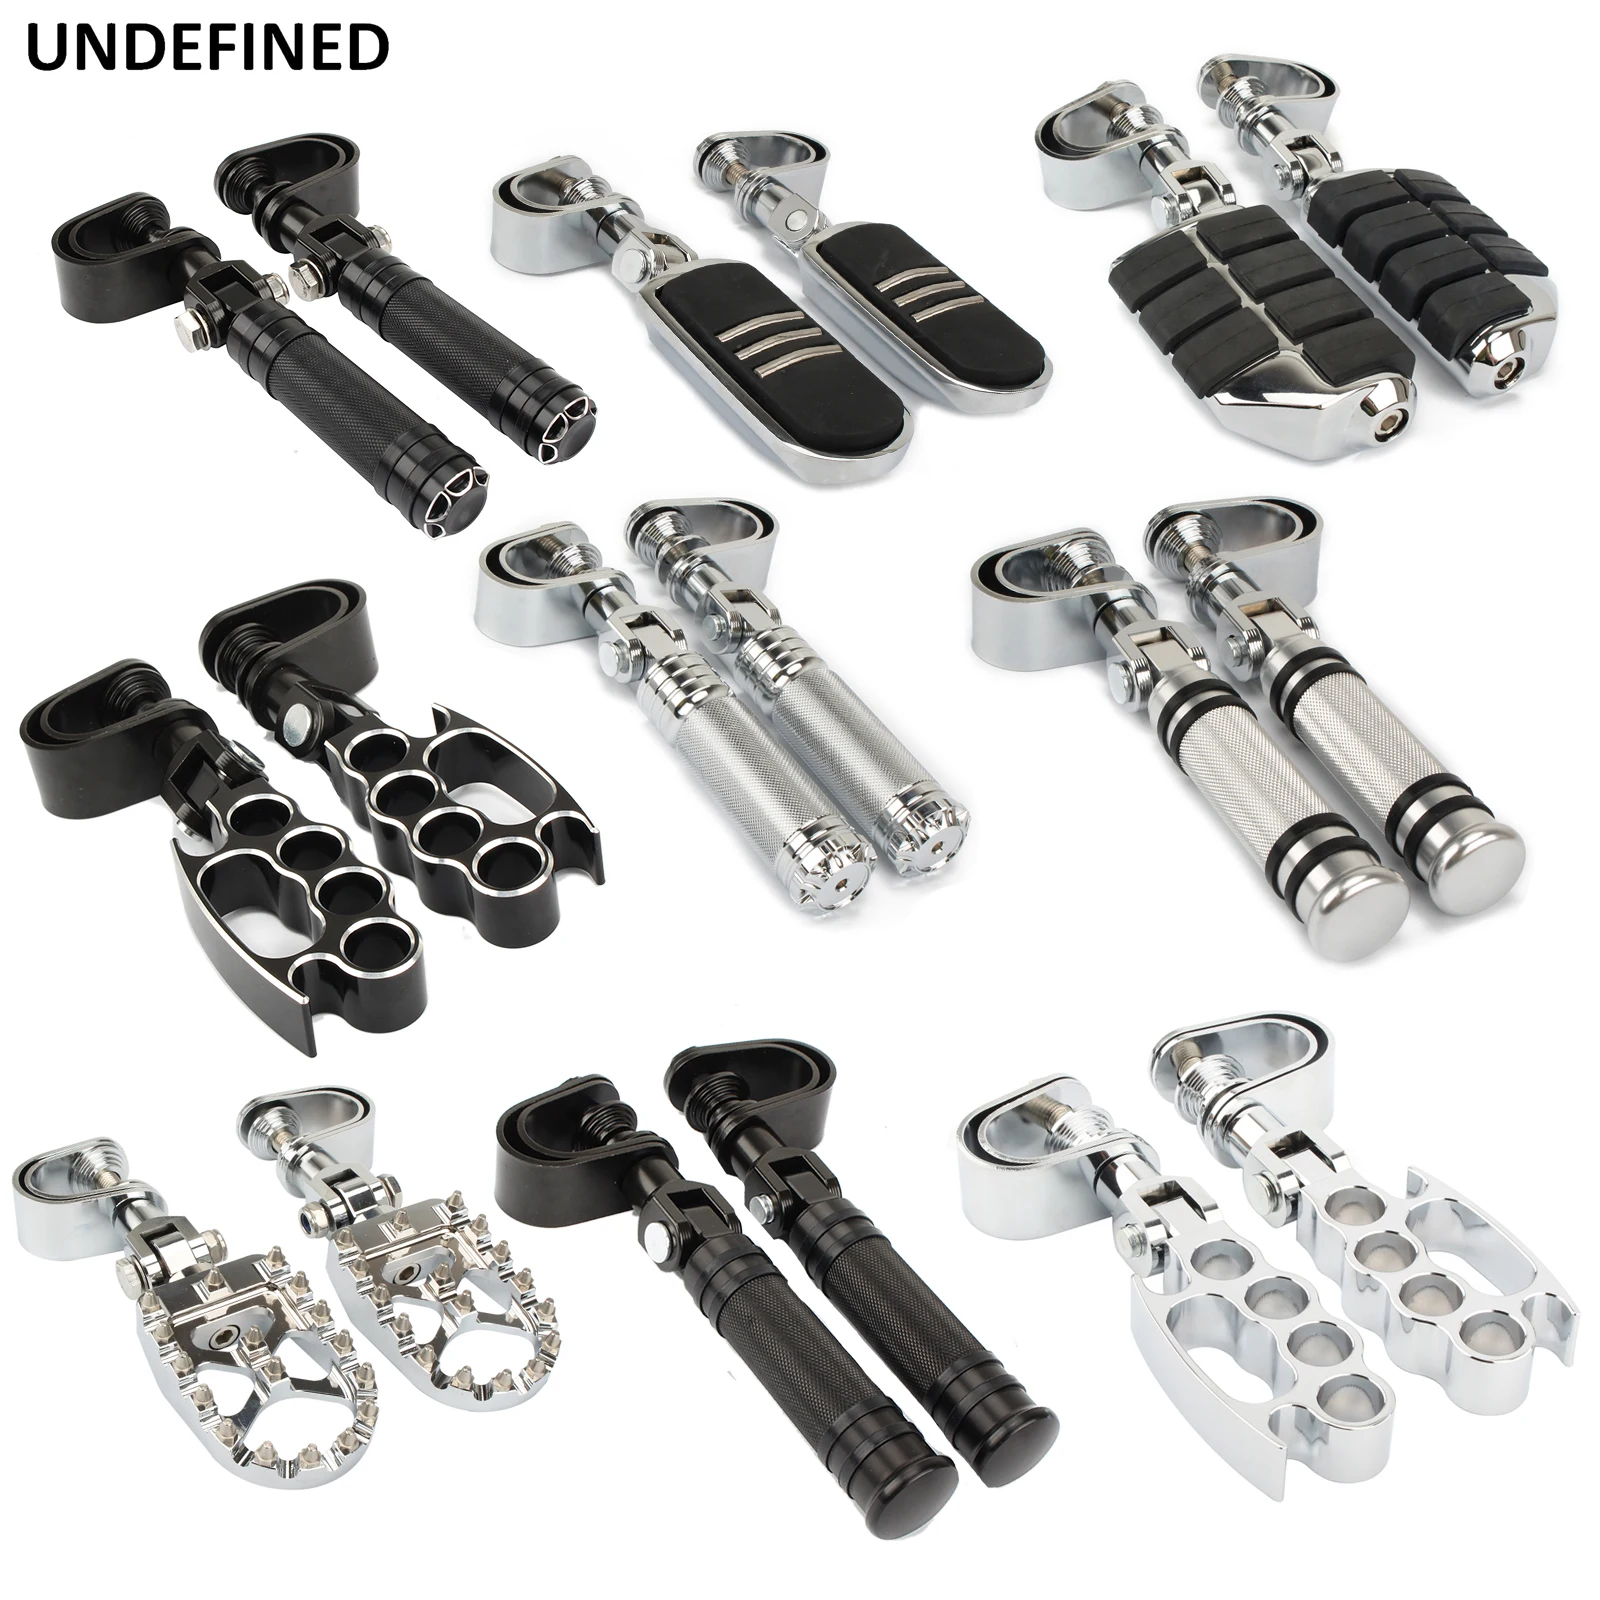 25mm-32mm Motorcycle Highway Pegs Crash Bar Clamp Mount Engine Guard Foot pegs Footrest For Harley Sportster Softail Chopper